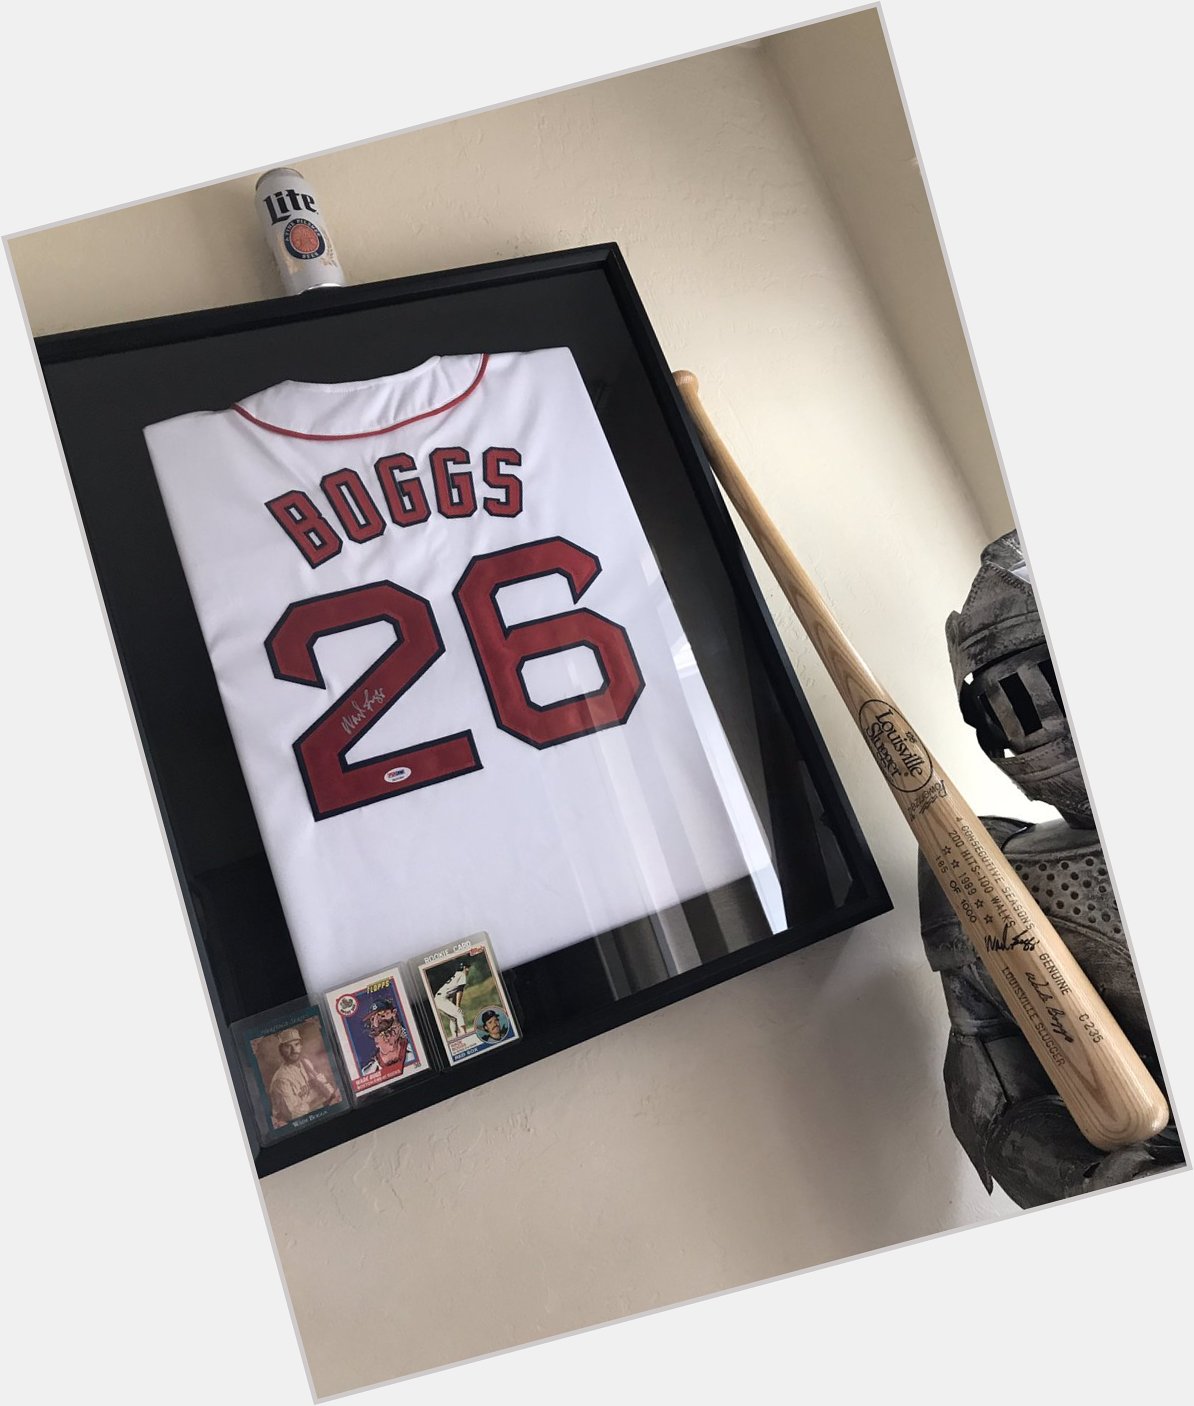  Happy Birthday to my childhood sports hero, the legend Wade Boggs! 